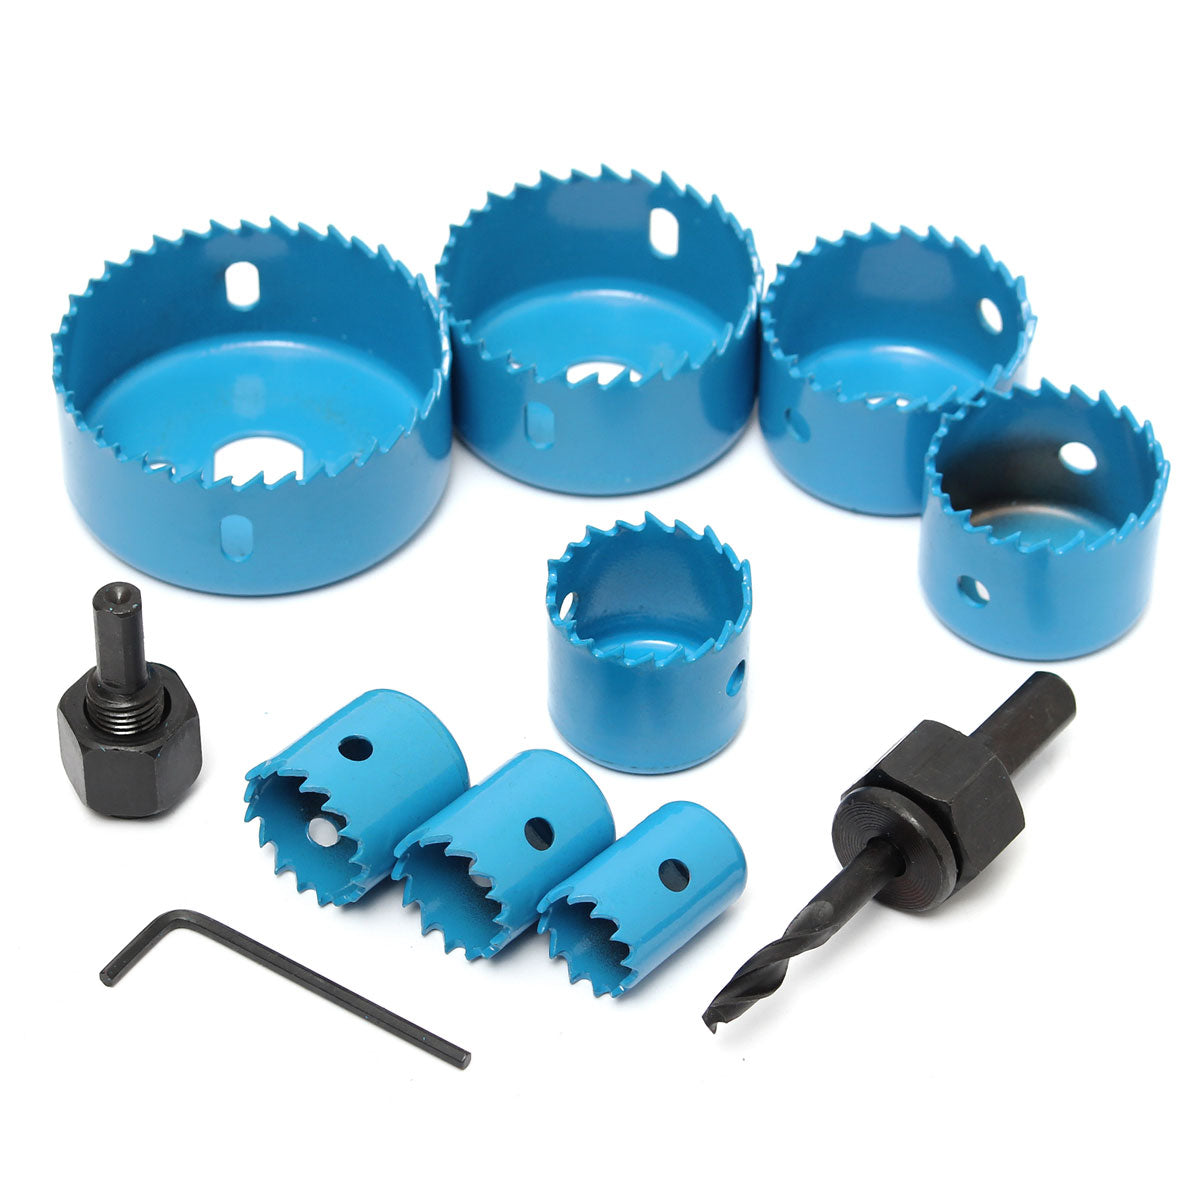 8pcs Blue Hole Saw Cutter Set with Hex Wrench Wood Alloy Iron Cutter for Woodworking